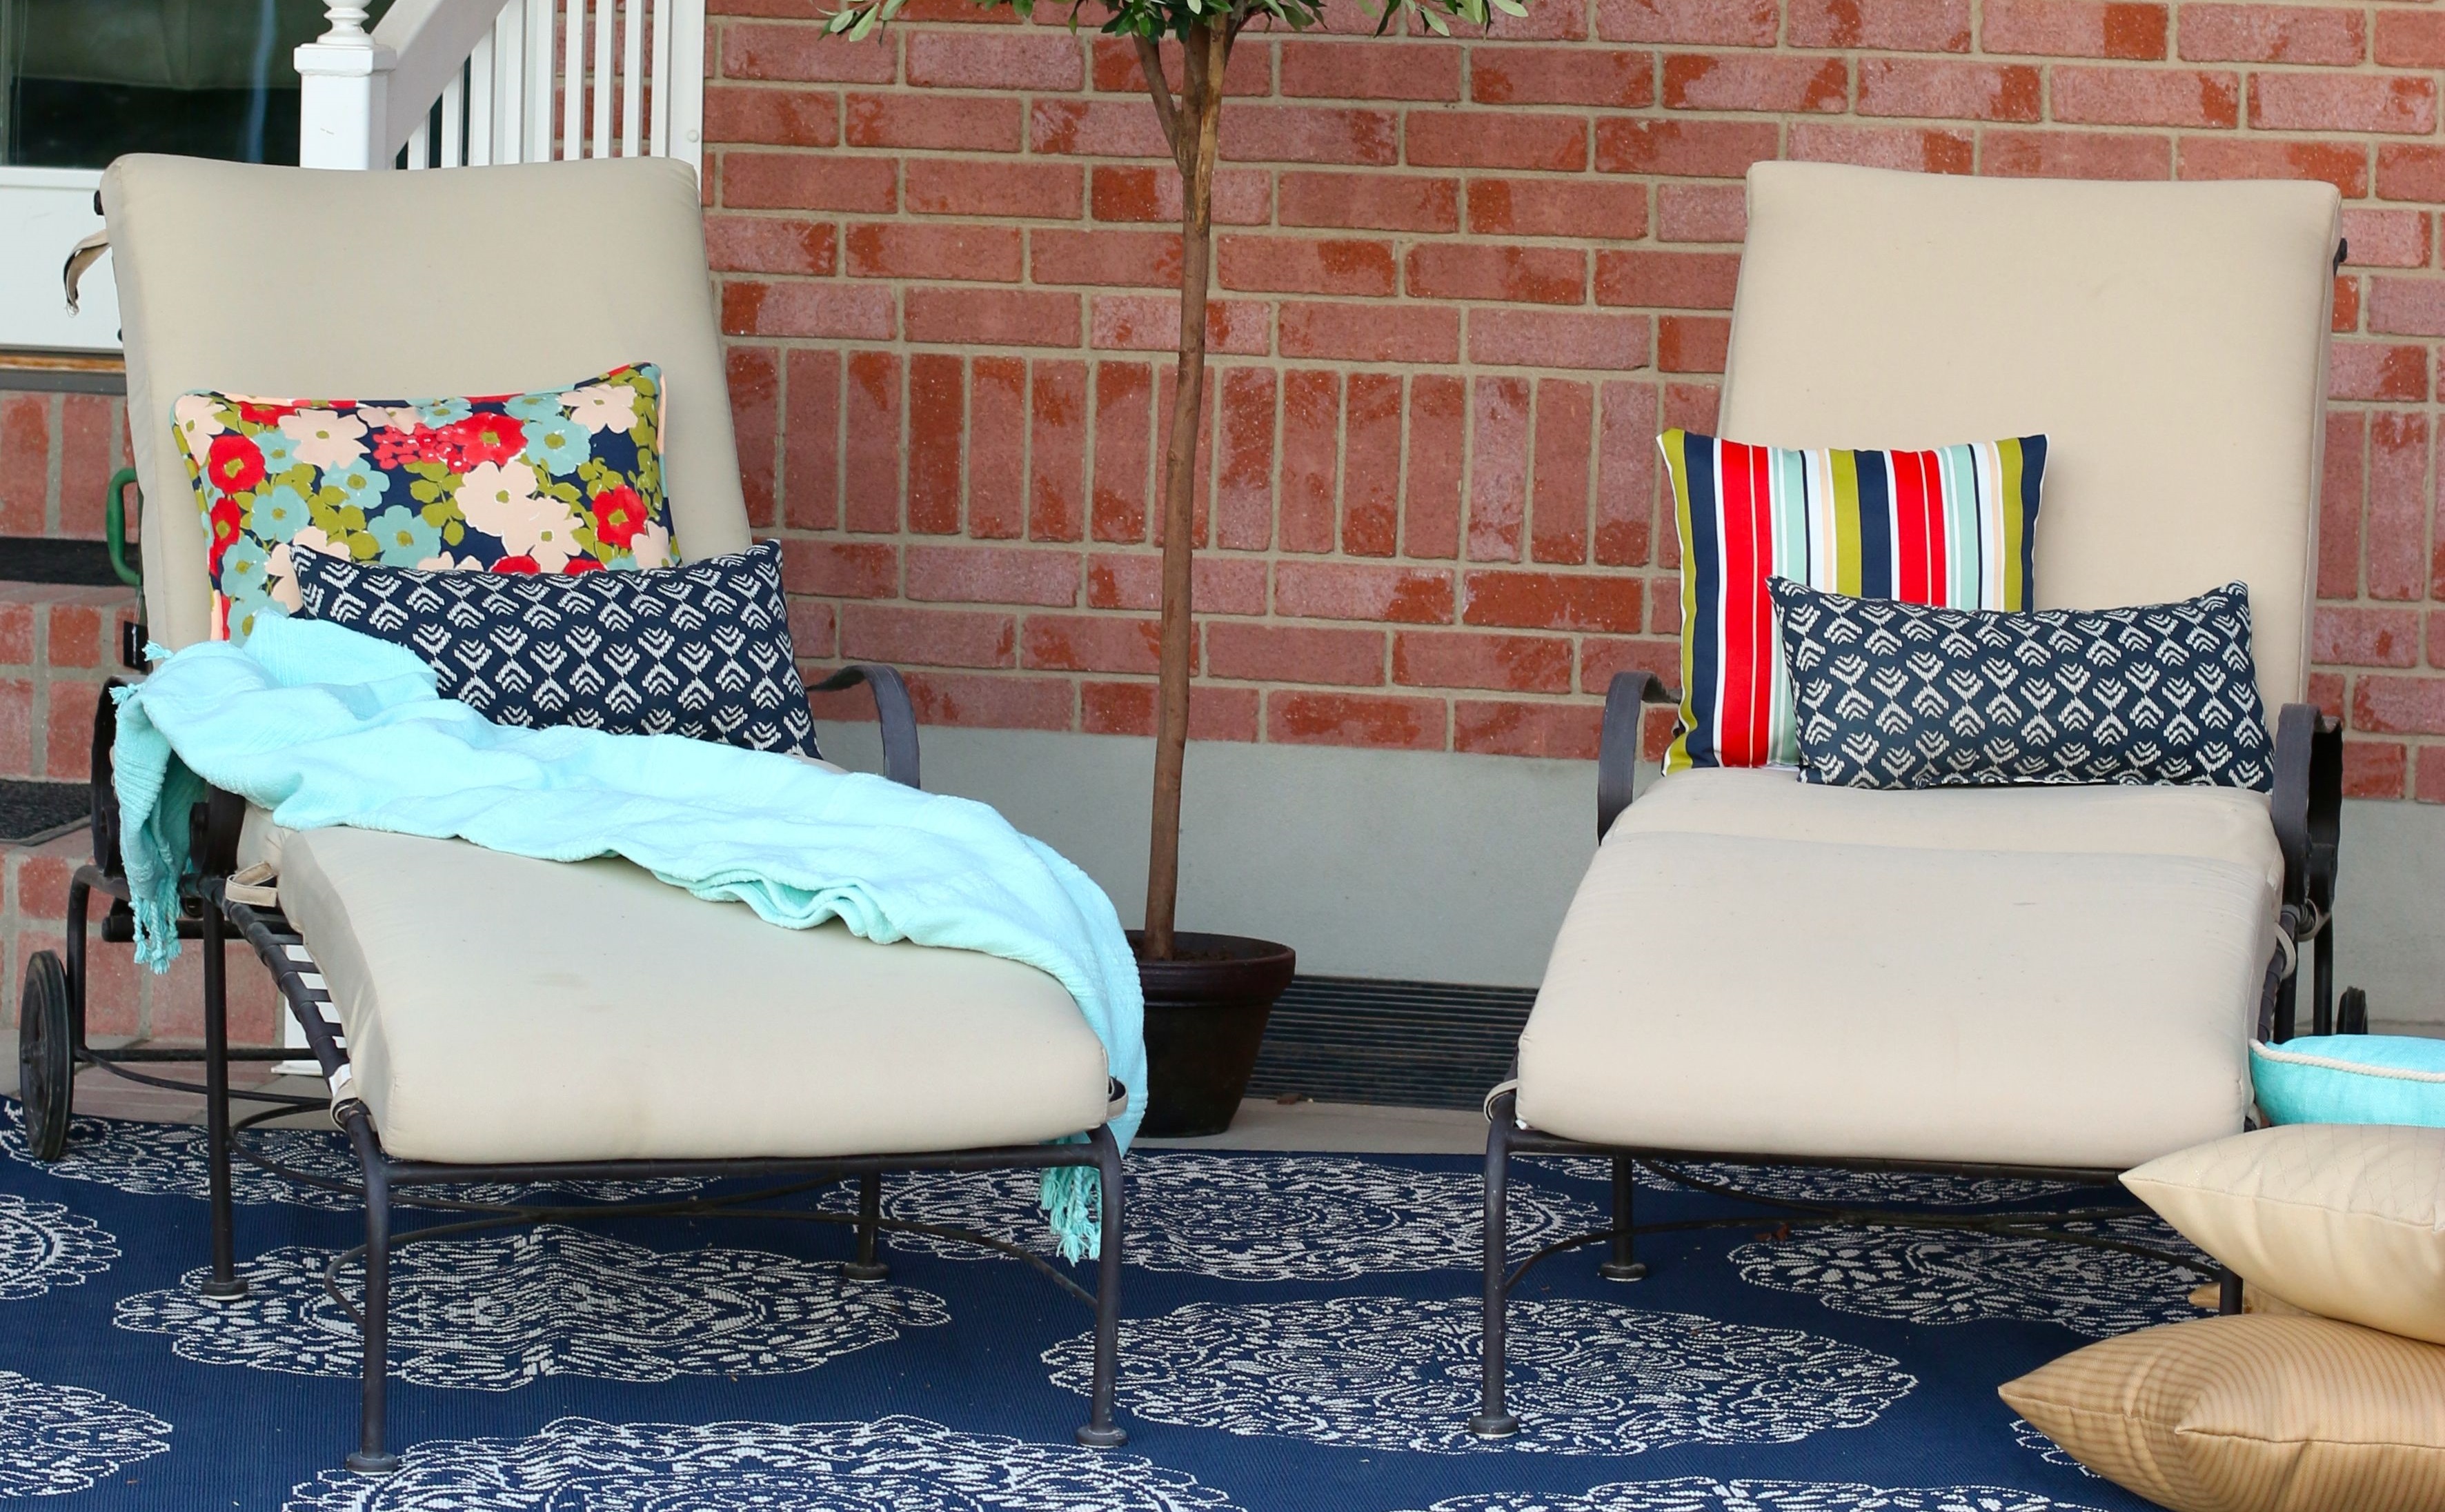 Patio set from The Home Depot featuring brightly colored pillows and textured rug